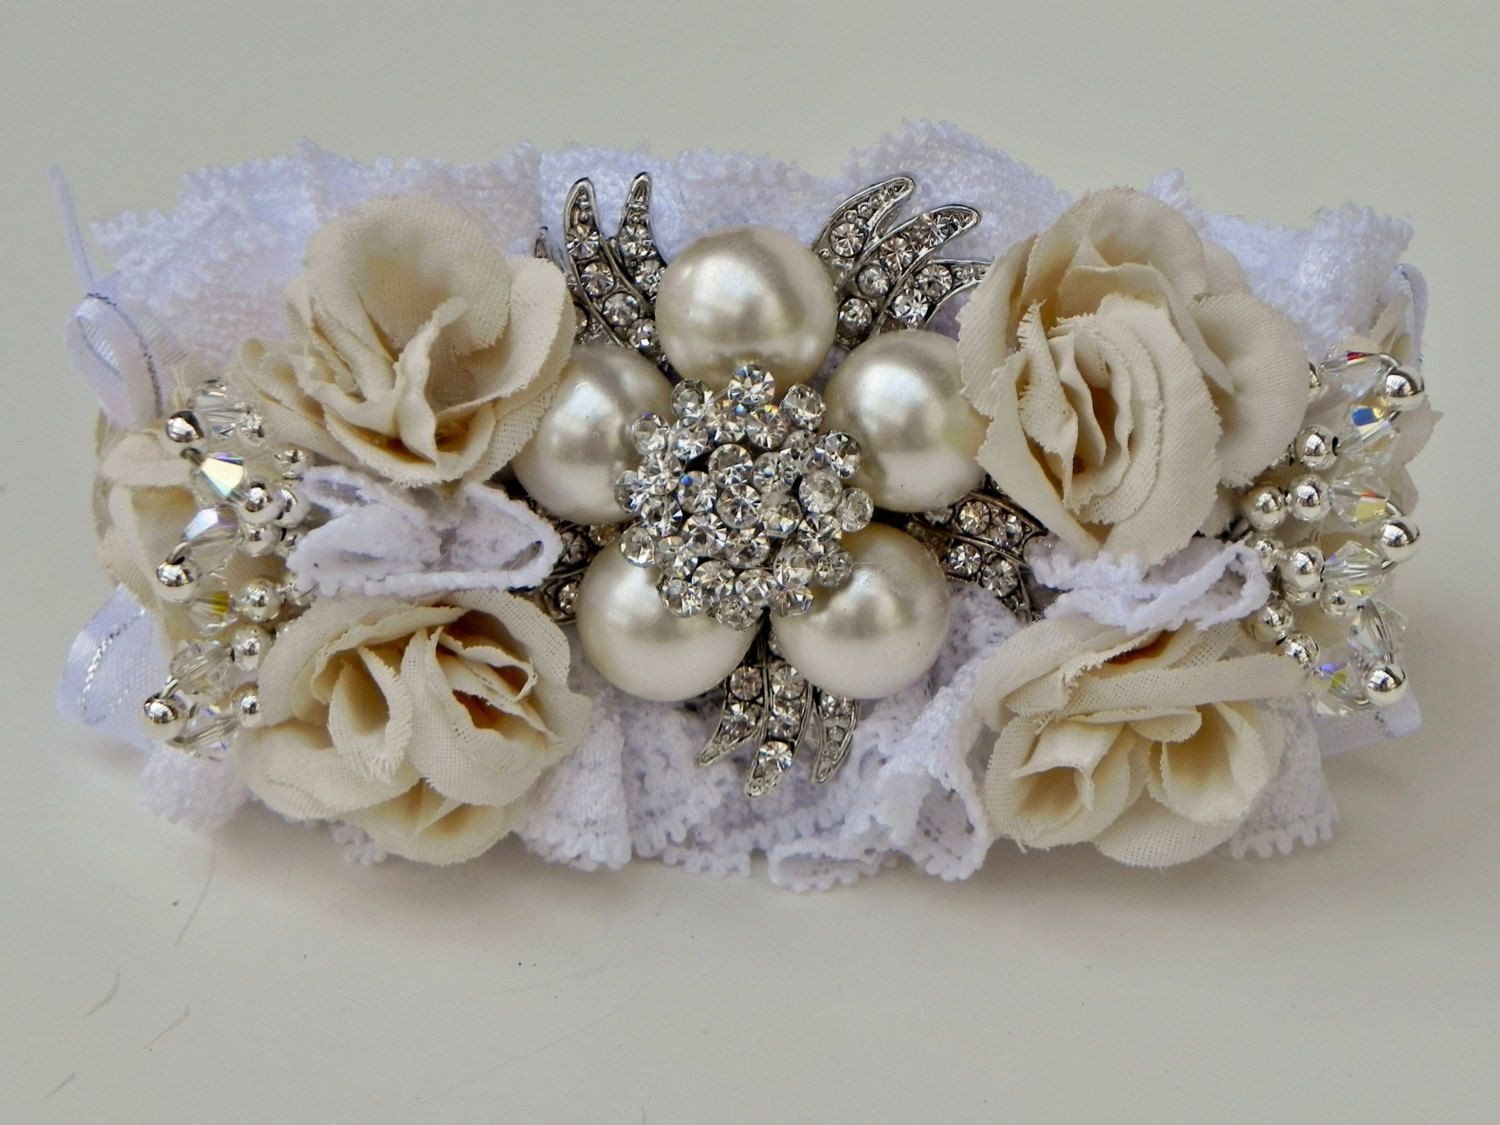 Brooches Corsage
 Brooch Wrist Corsage Ivory and White $40 00 via Etsy